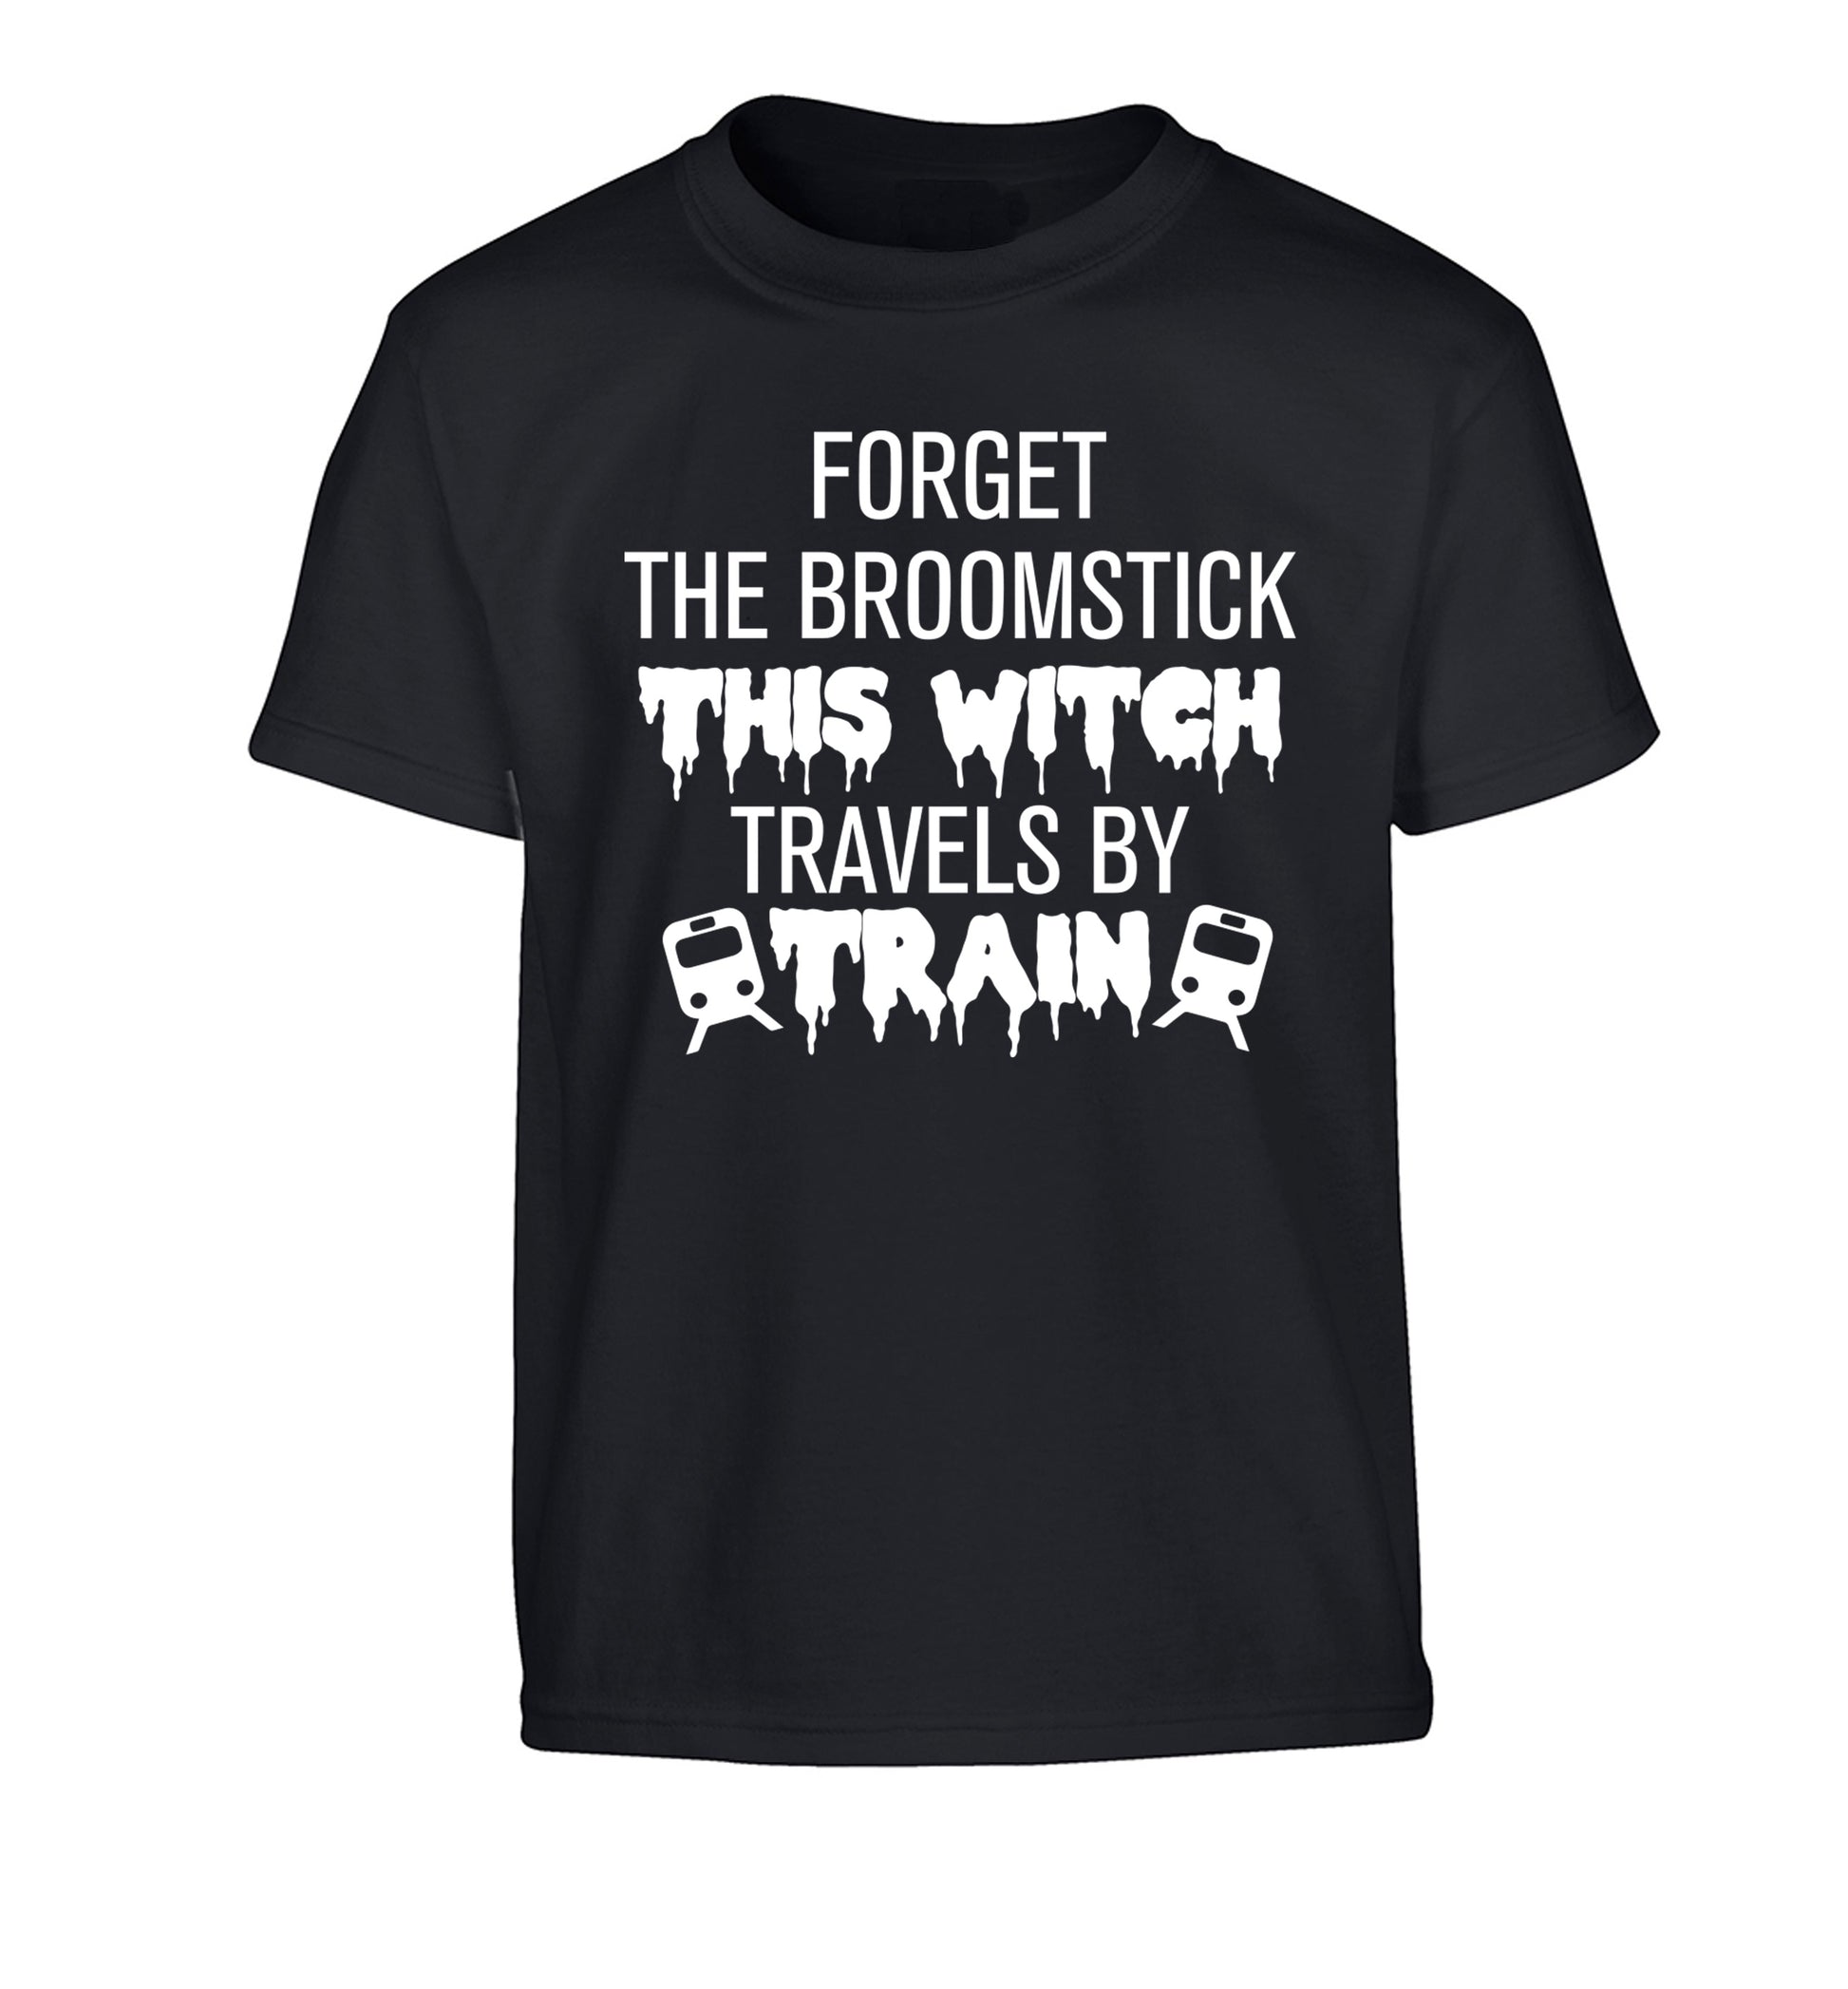 Forget the broomstick this witch travels by train Children's black Tshirt 12-14 Years